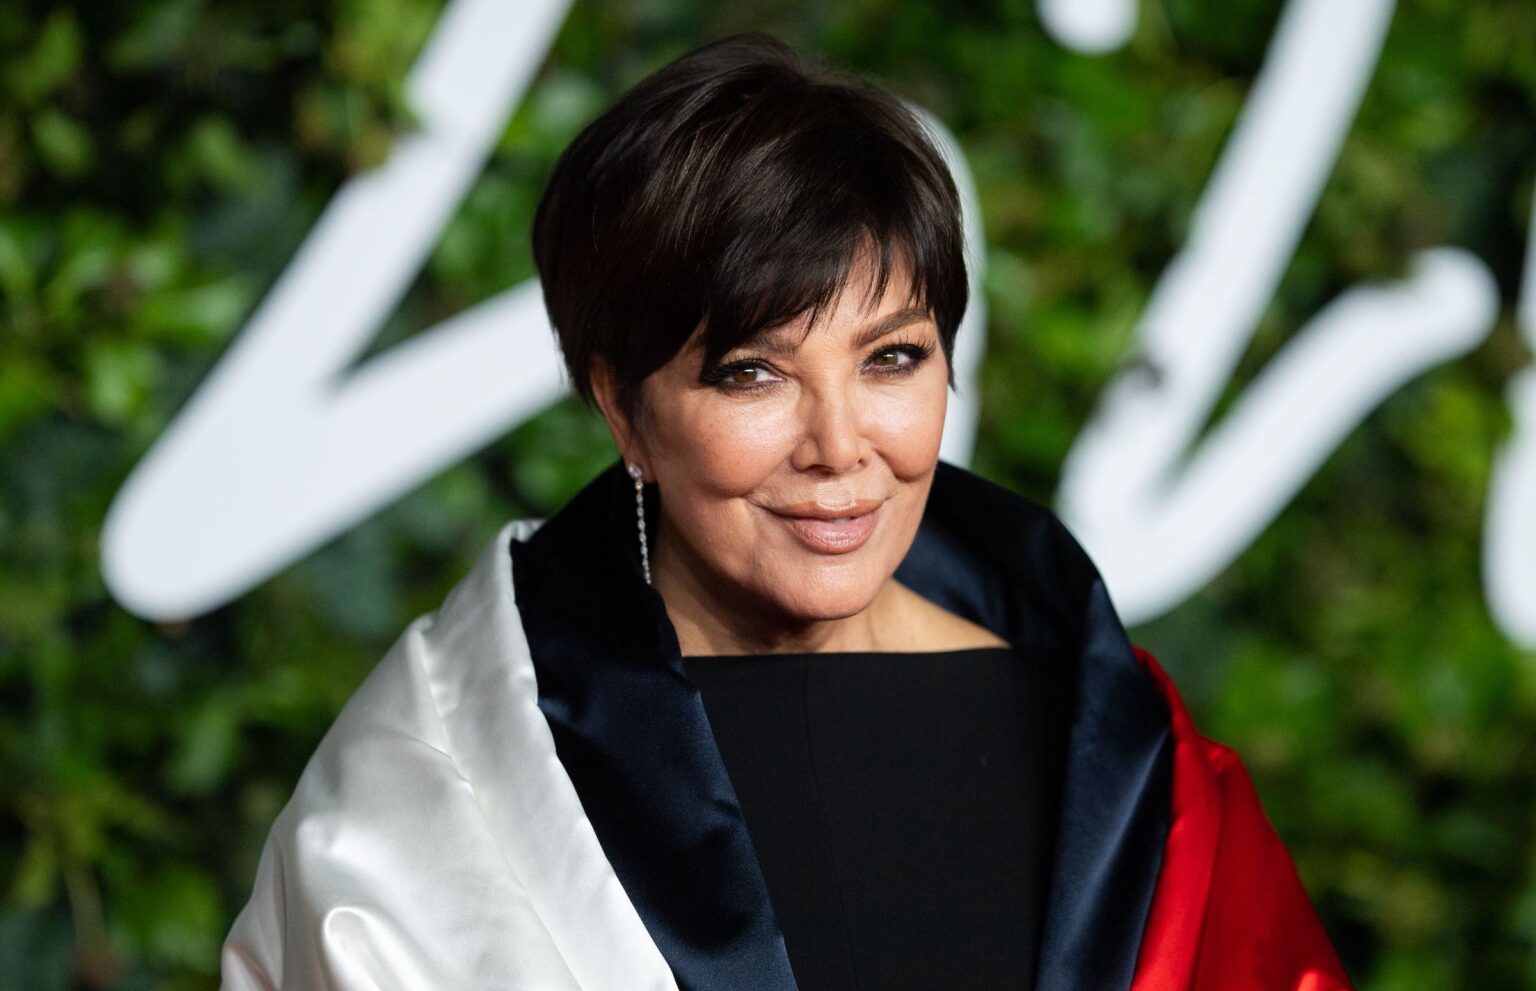 In the realm of celebrity stardom and business acumen, few names shine as brightly as Kris Jenner. Let's take a peek at her ever growing net worth.